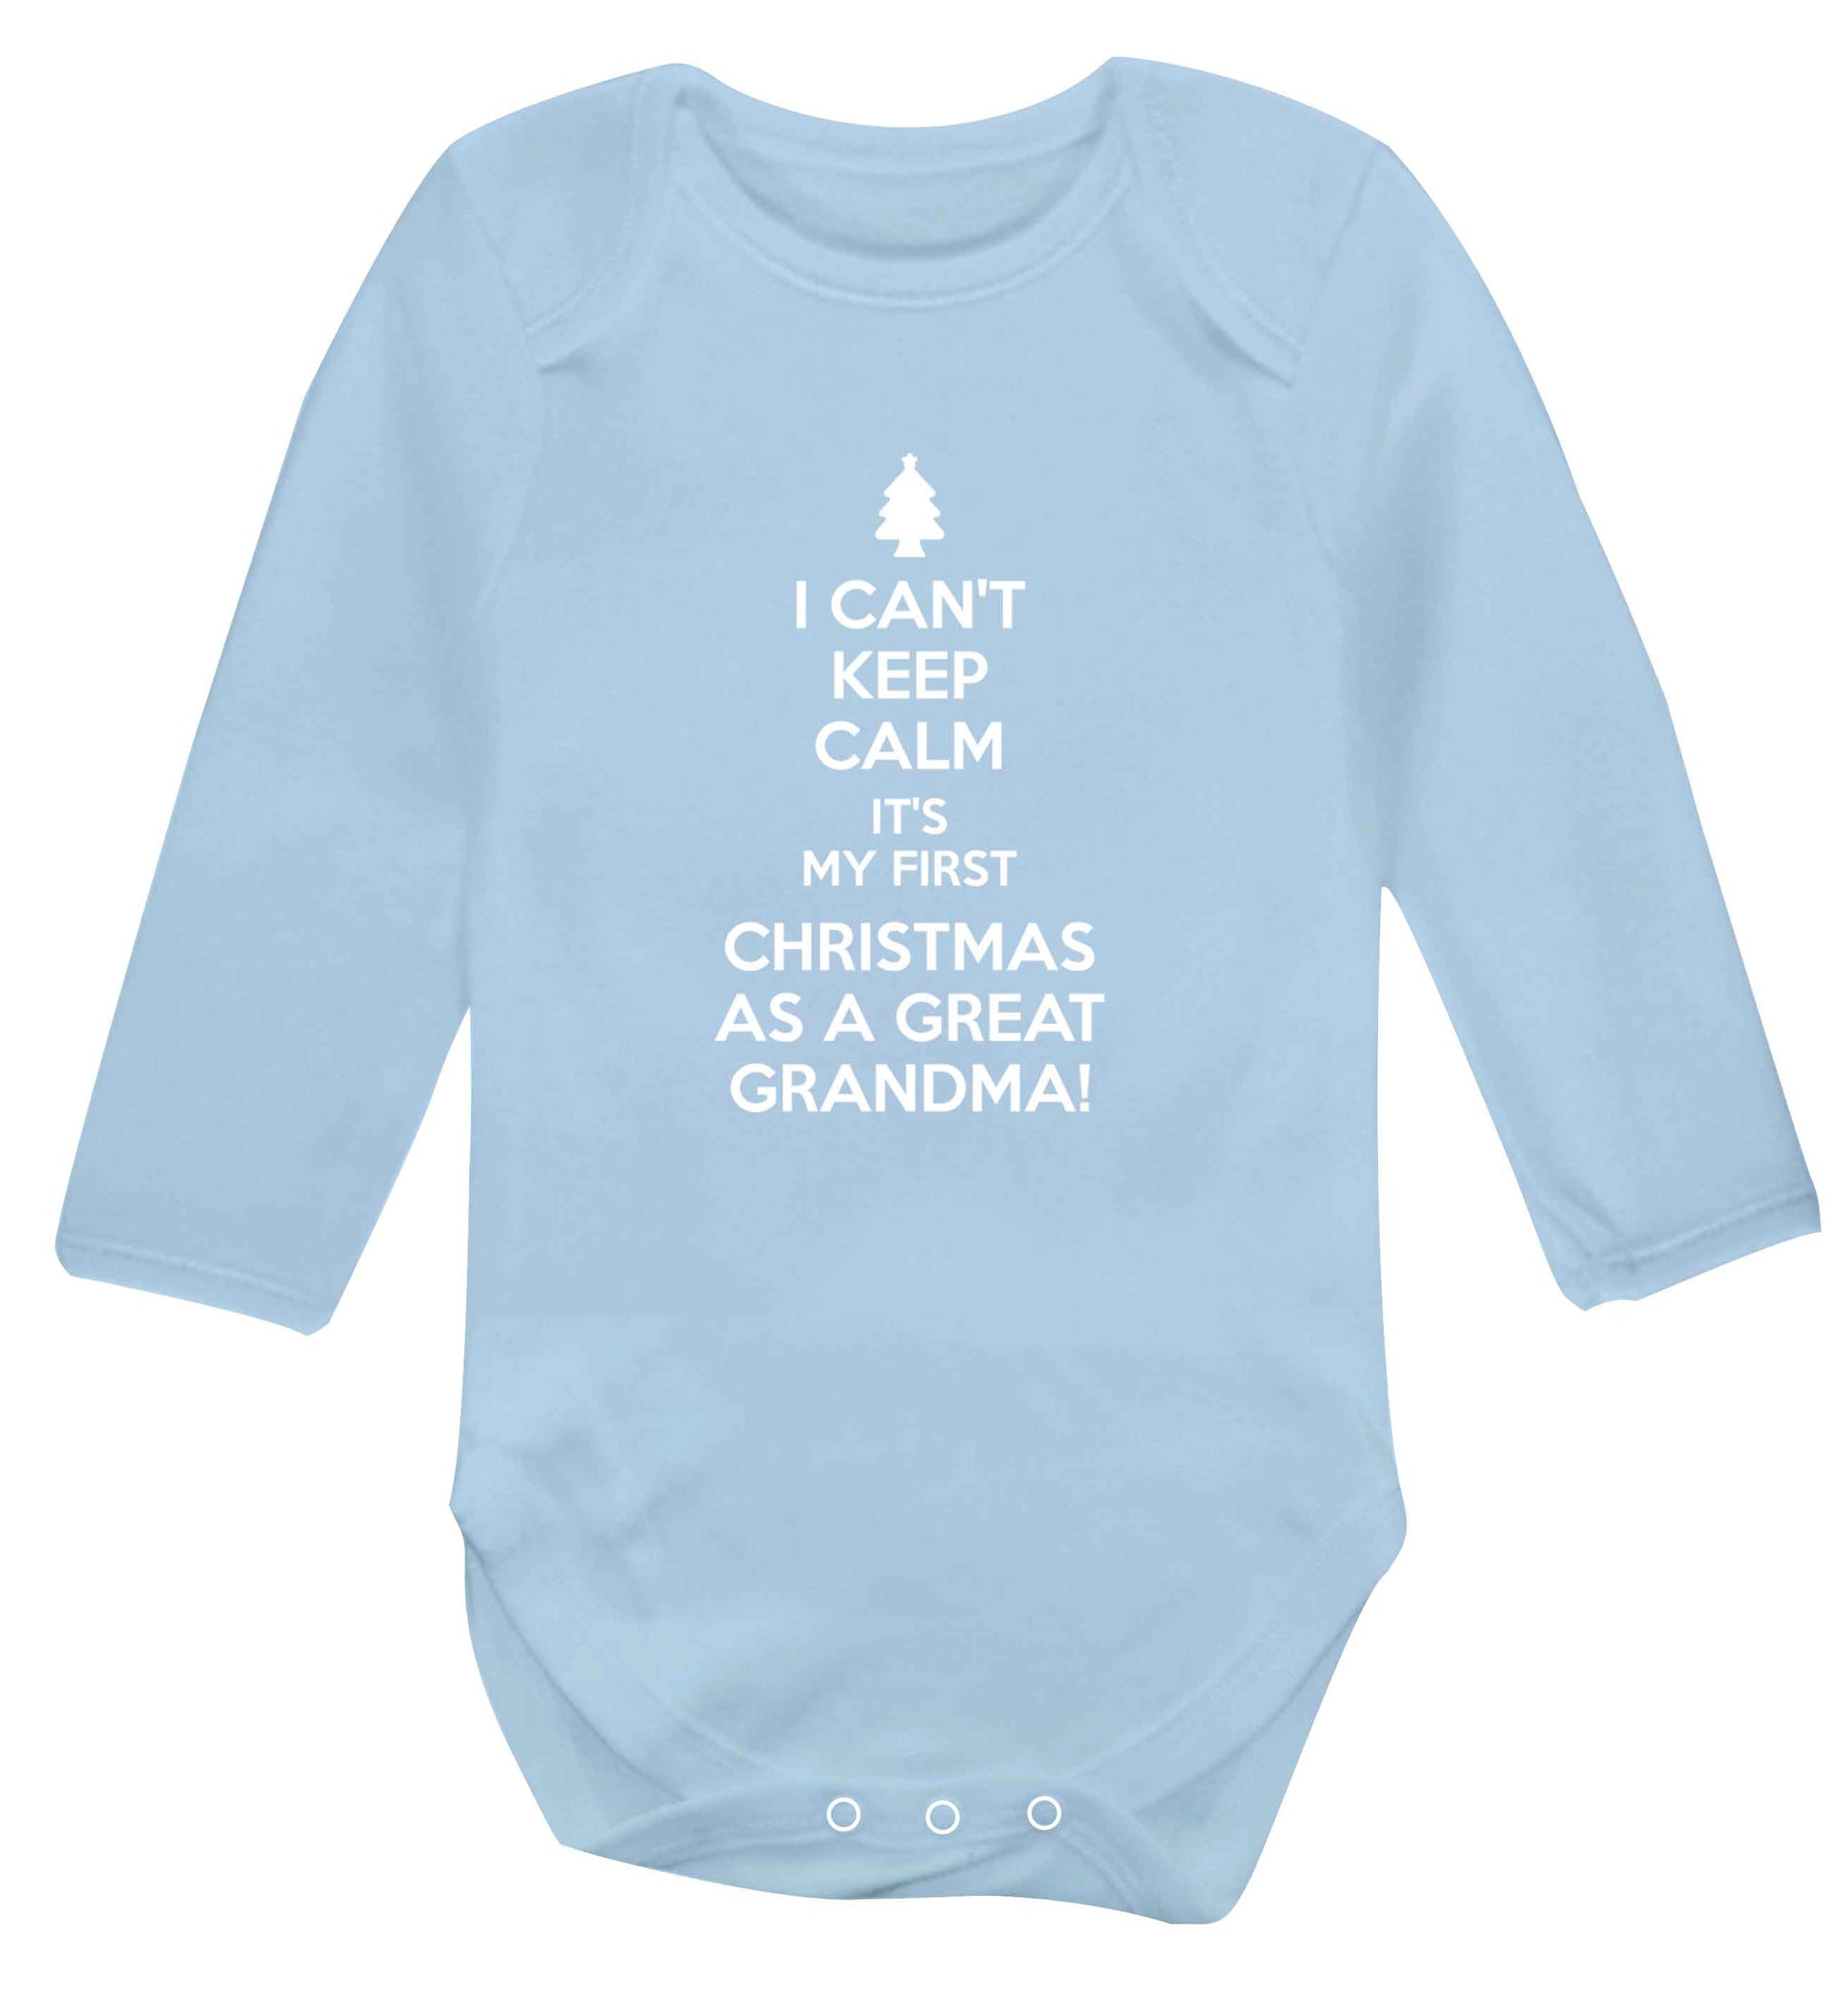 I can't keep calm it's my first Christmas as a great grandma! Baby Vest long sleeved pale blue 6-12 months